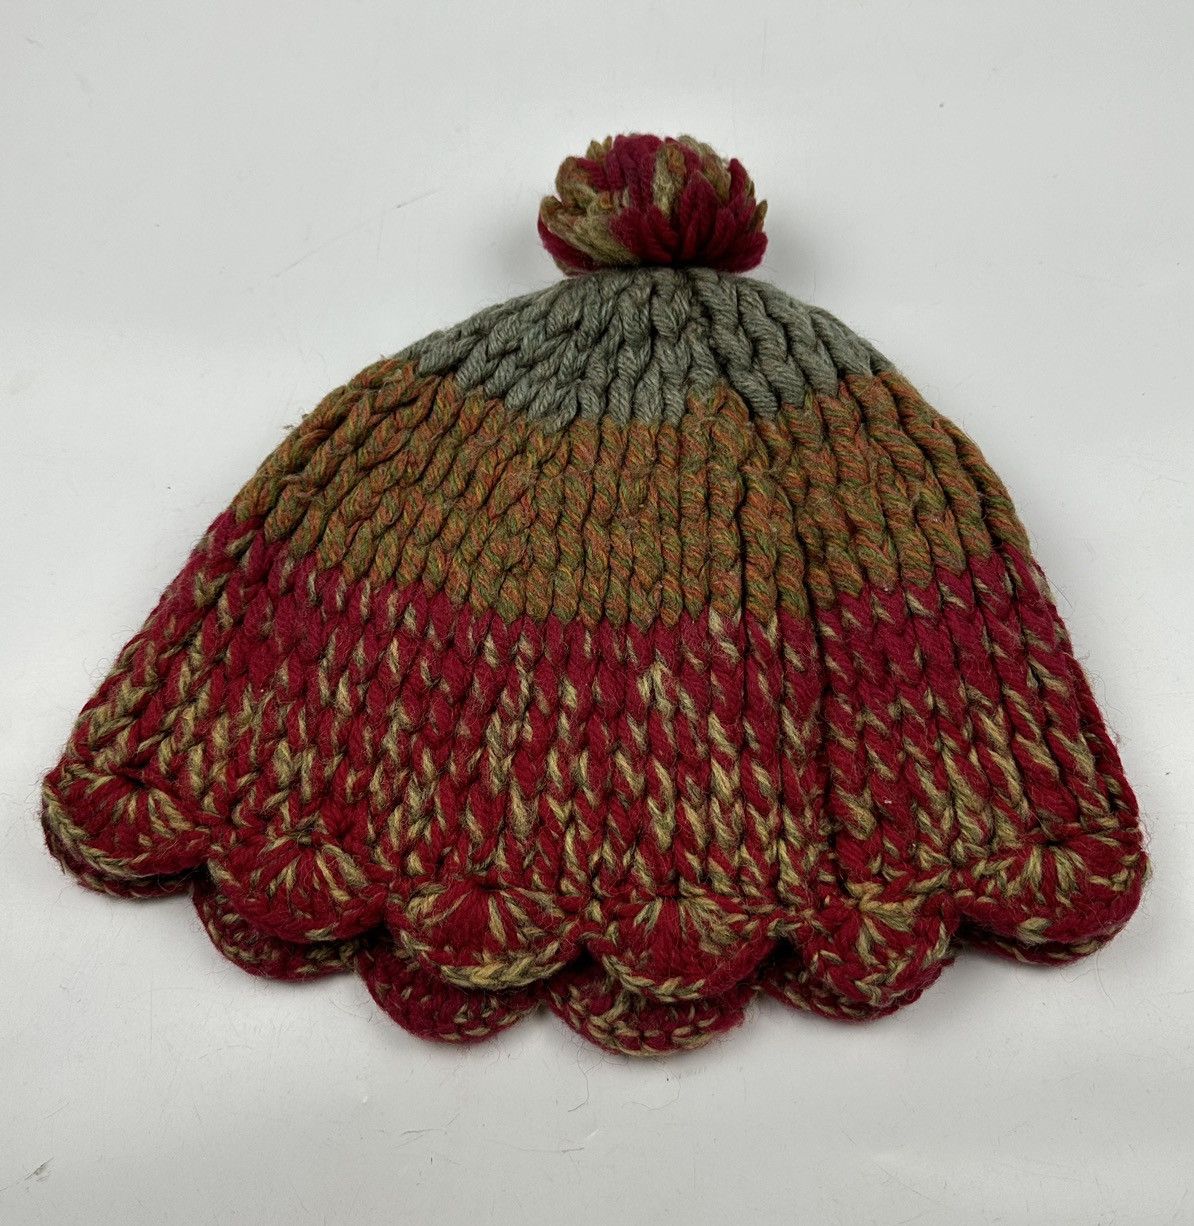 custom made knitted hat tg3 - 4